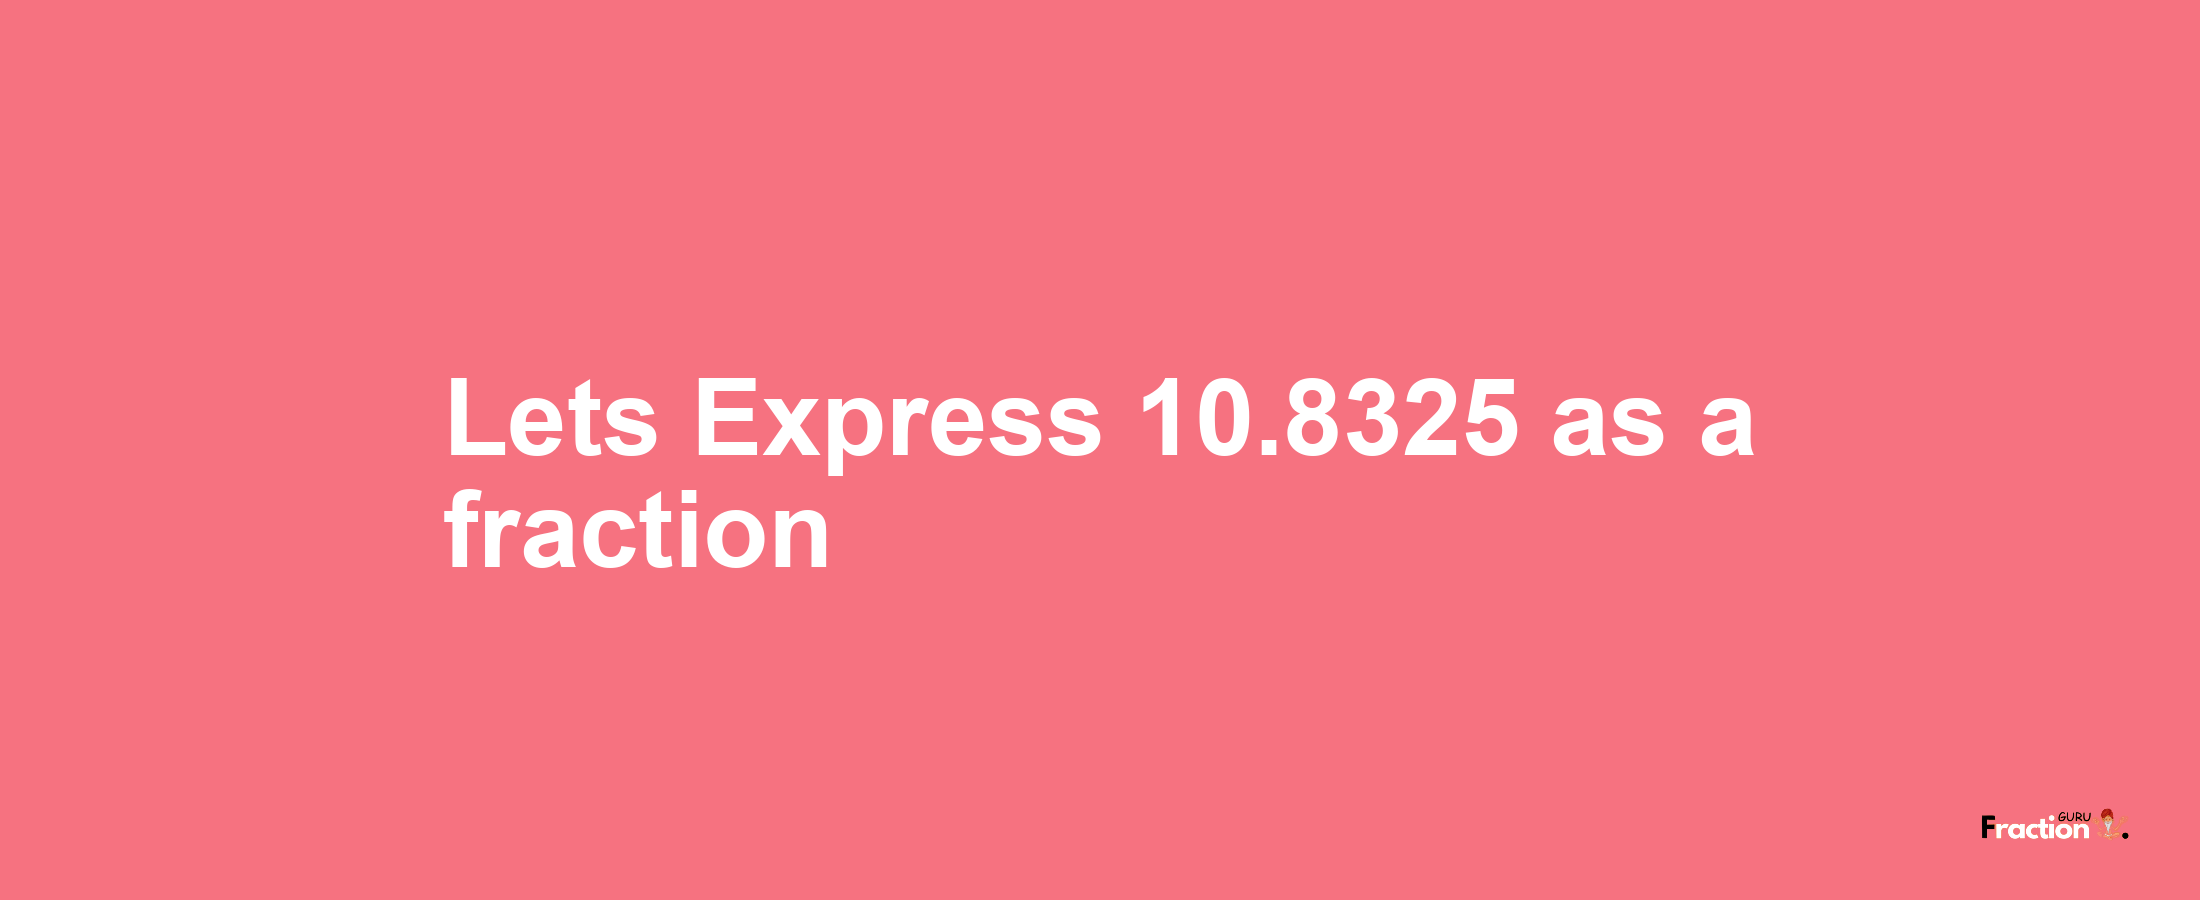 Lets Express 10.8325 as afraction